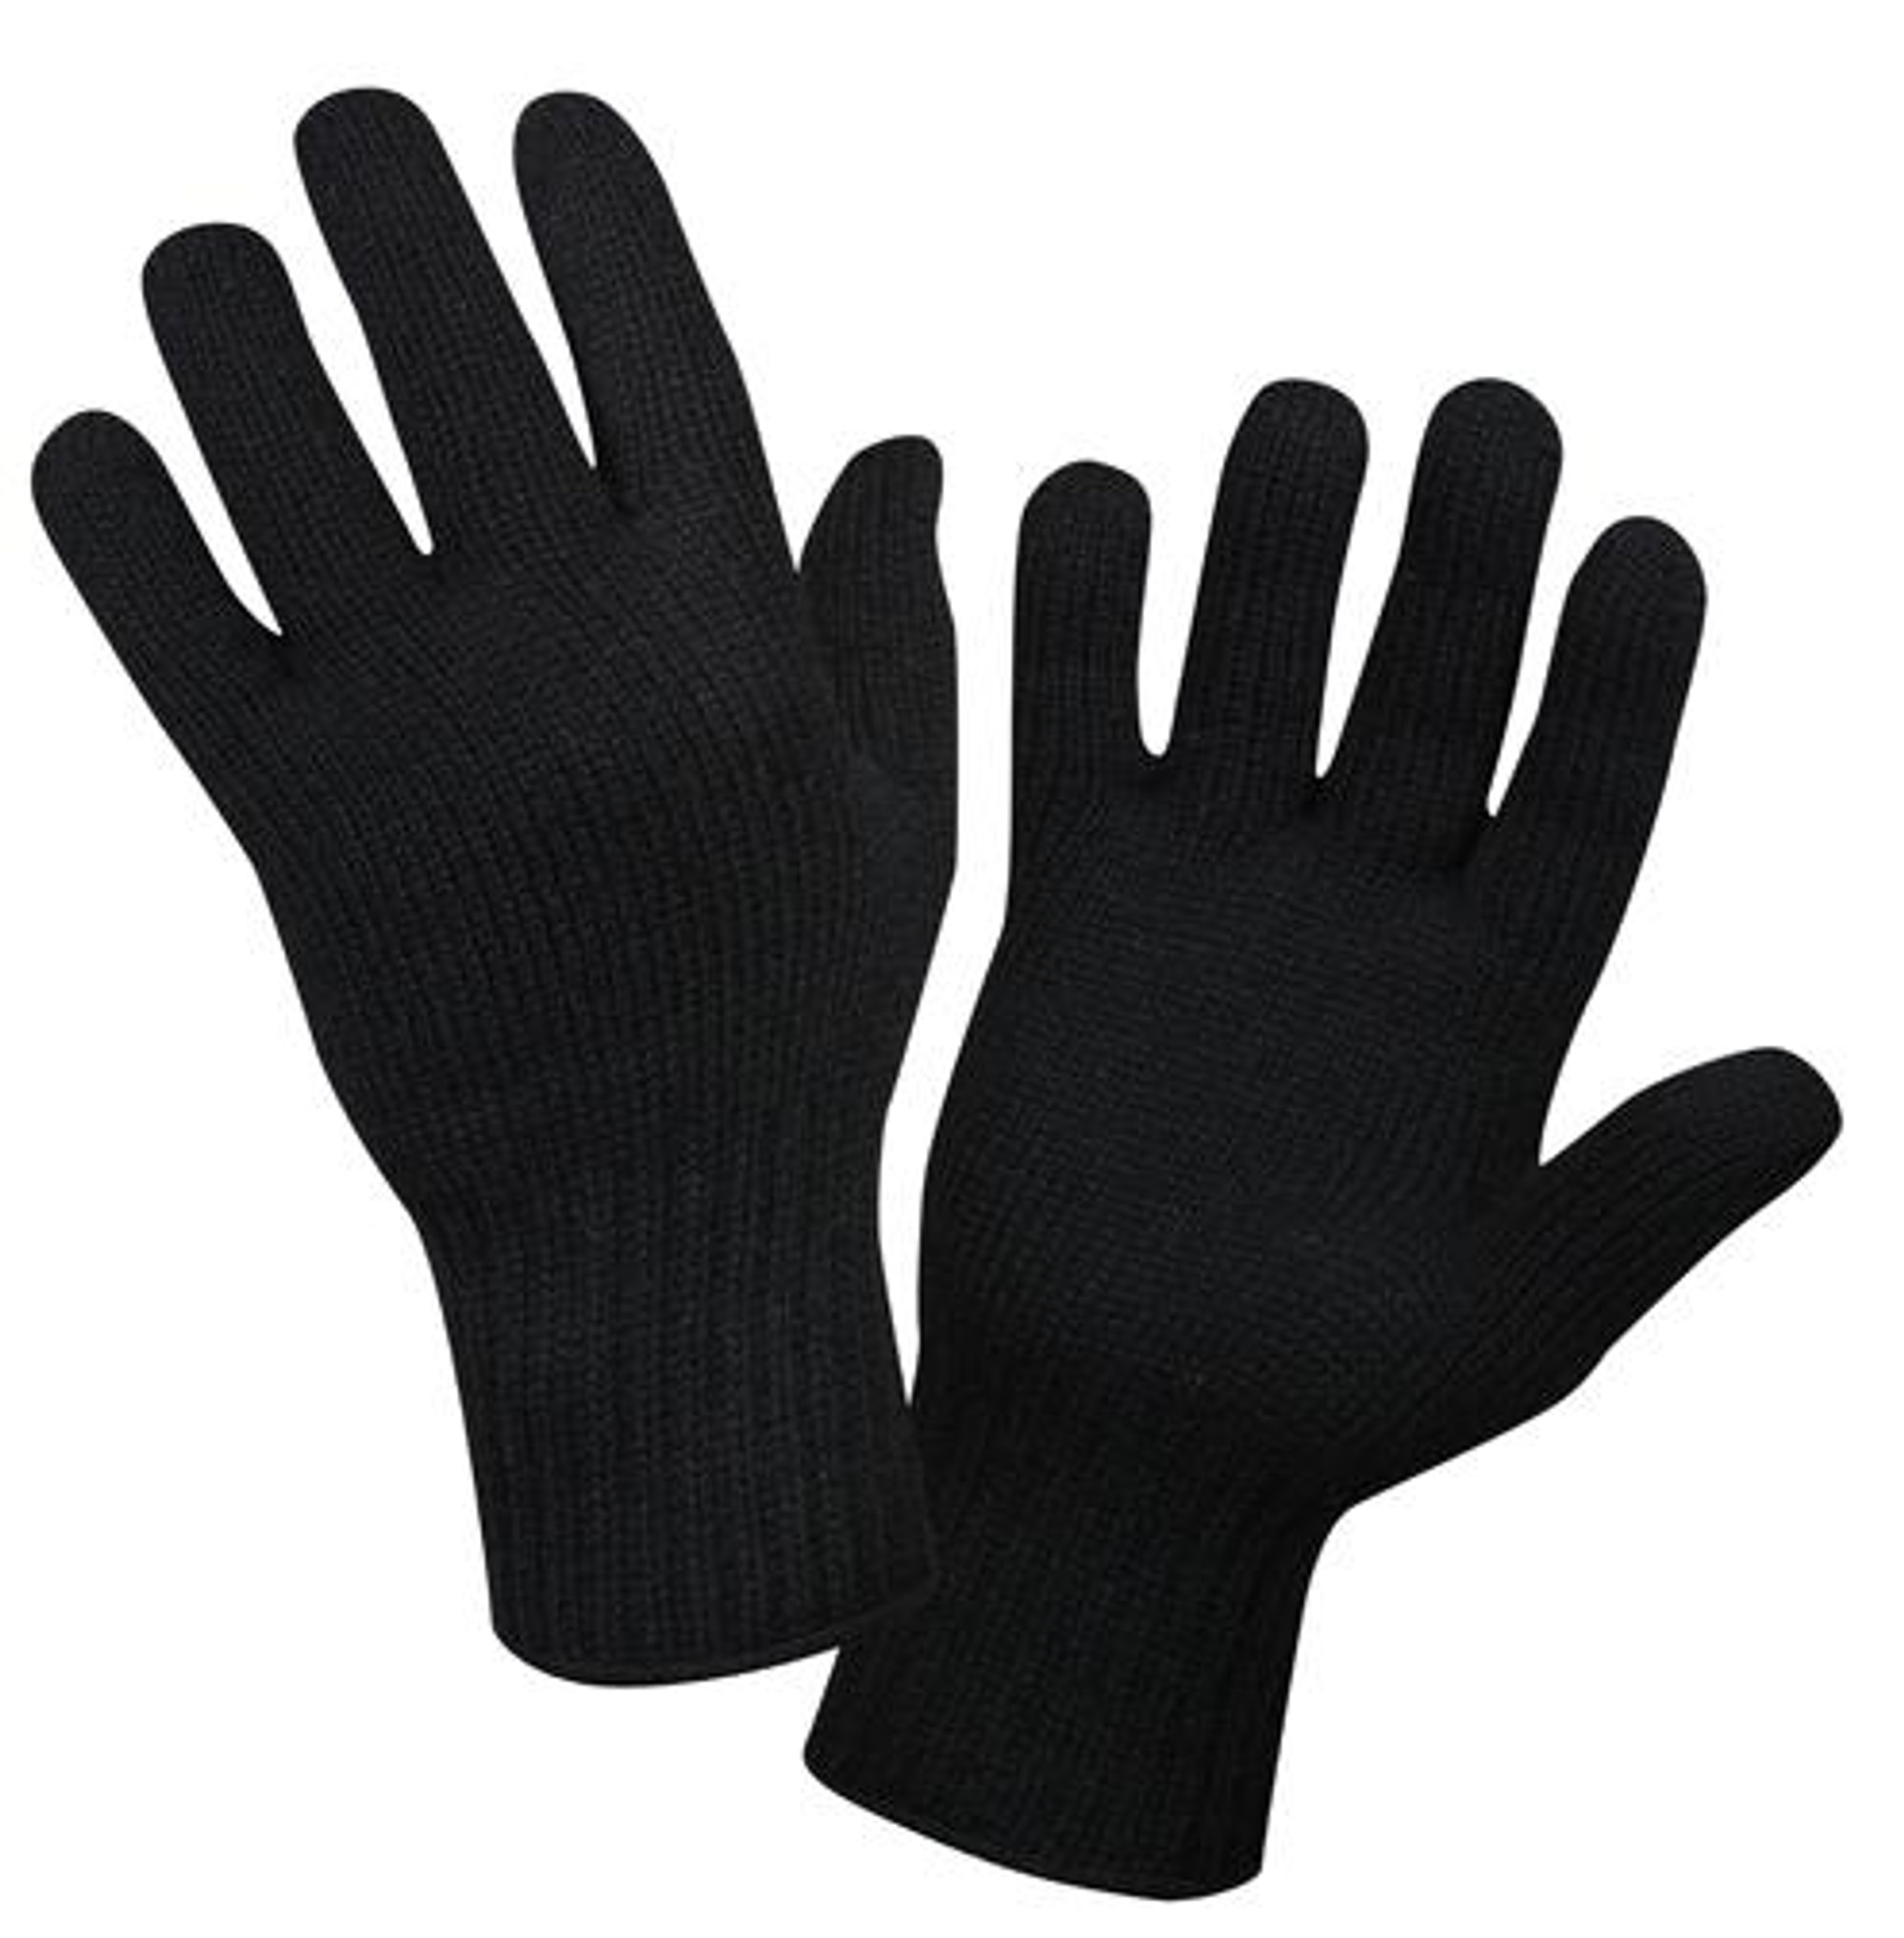 Rothco Wool Glove Liners - Unstamped - Black